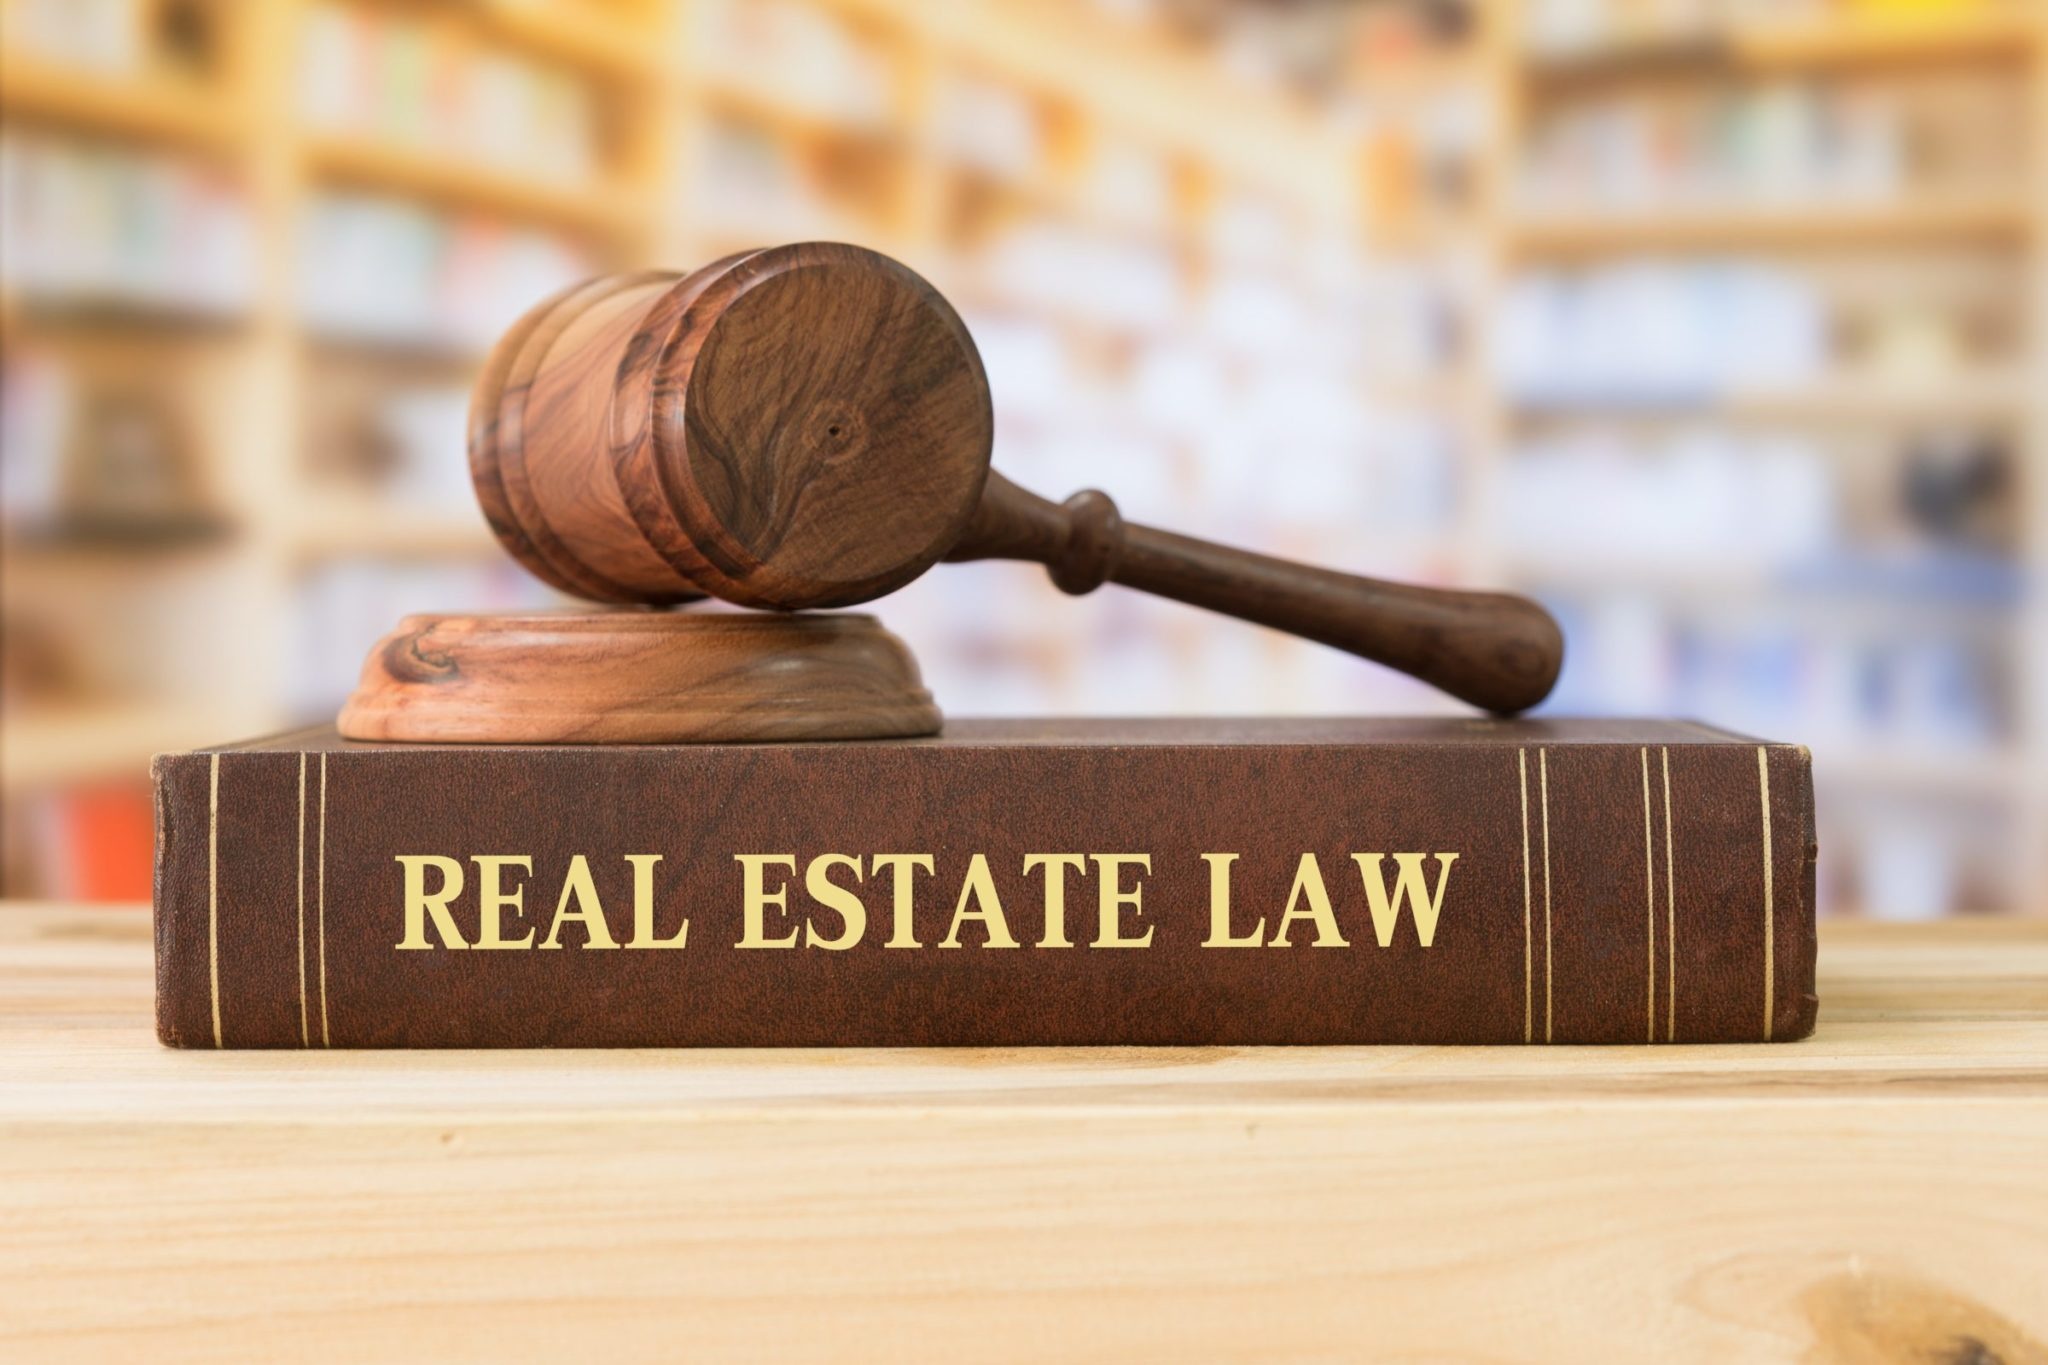 Real estate lawyer, Property legal matters, Home buying process, Legal advice, 2050x1370 HD Desktop